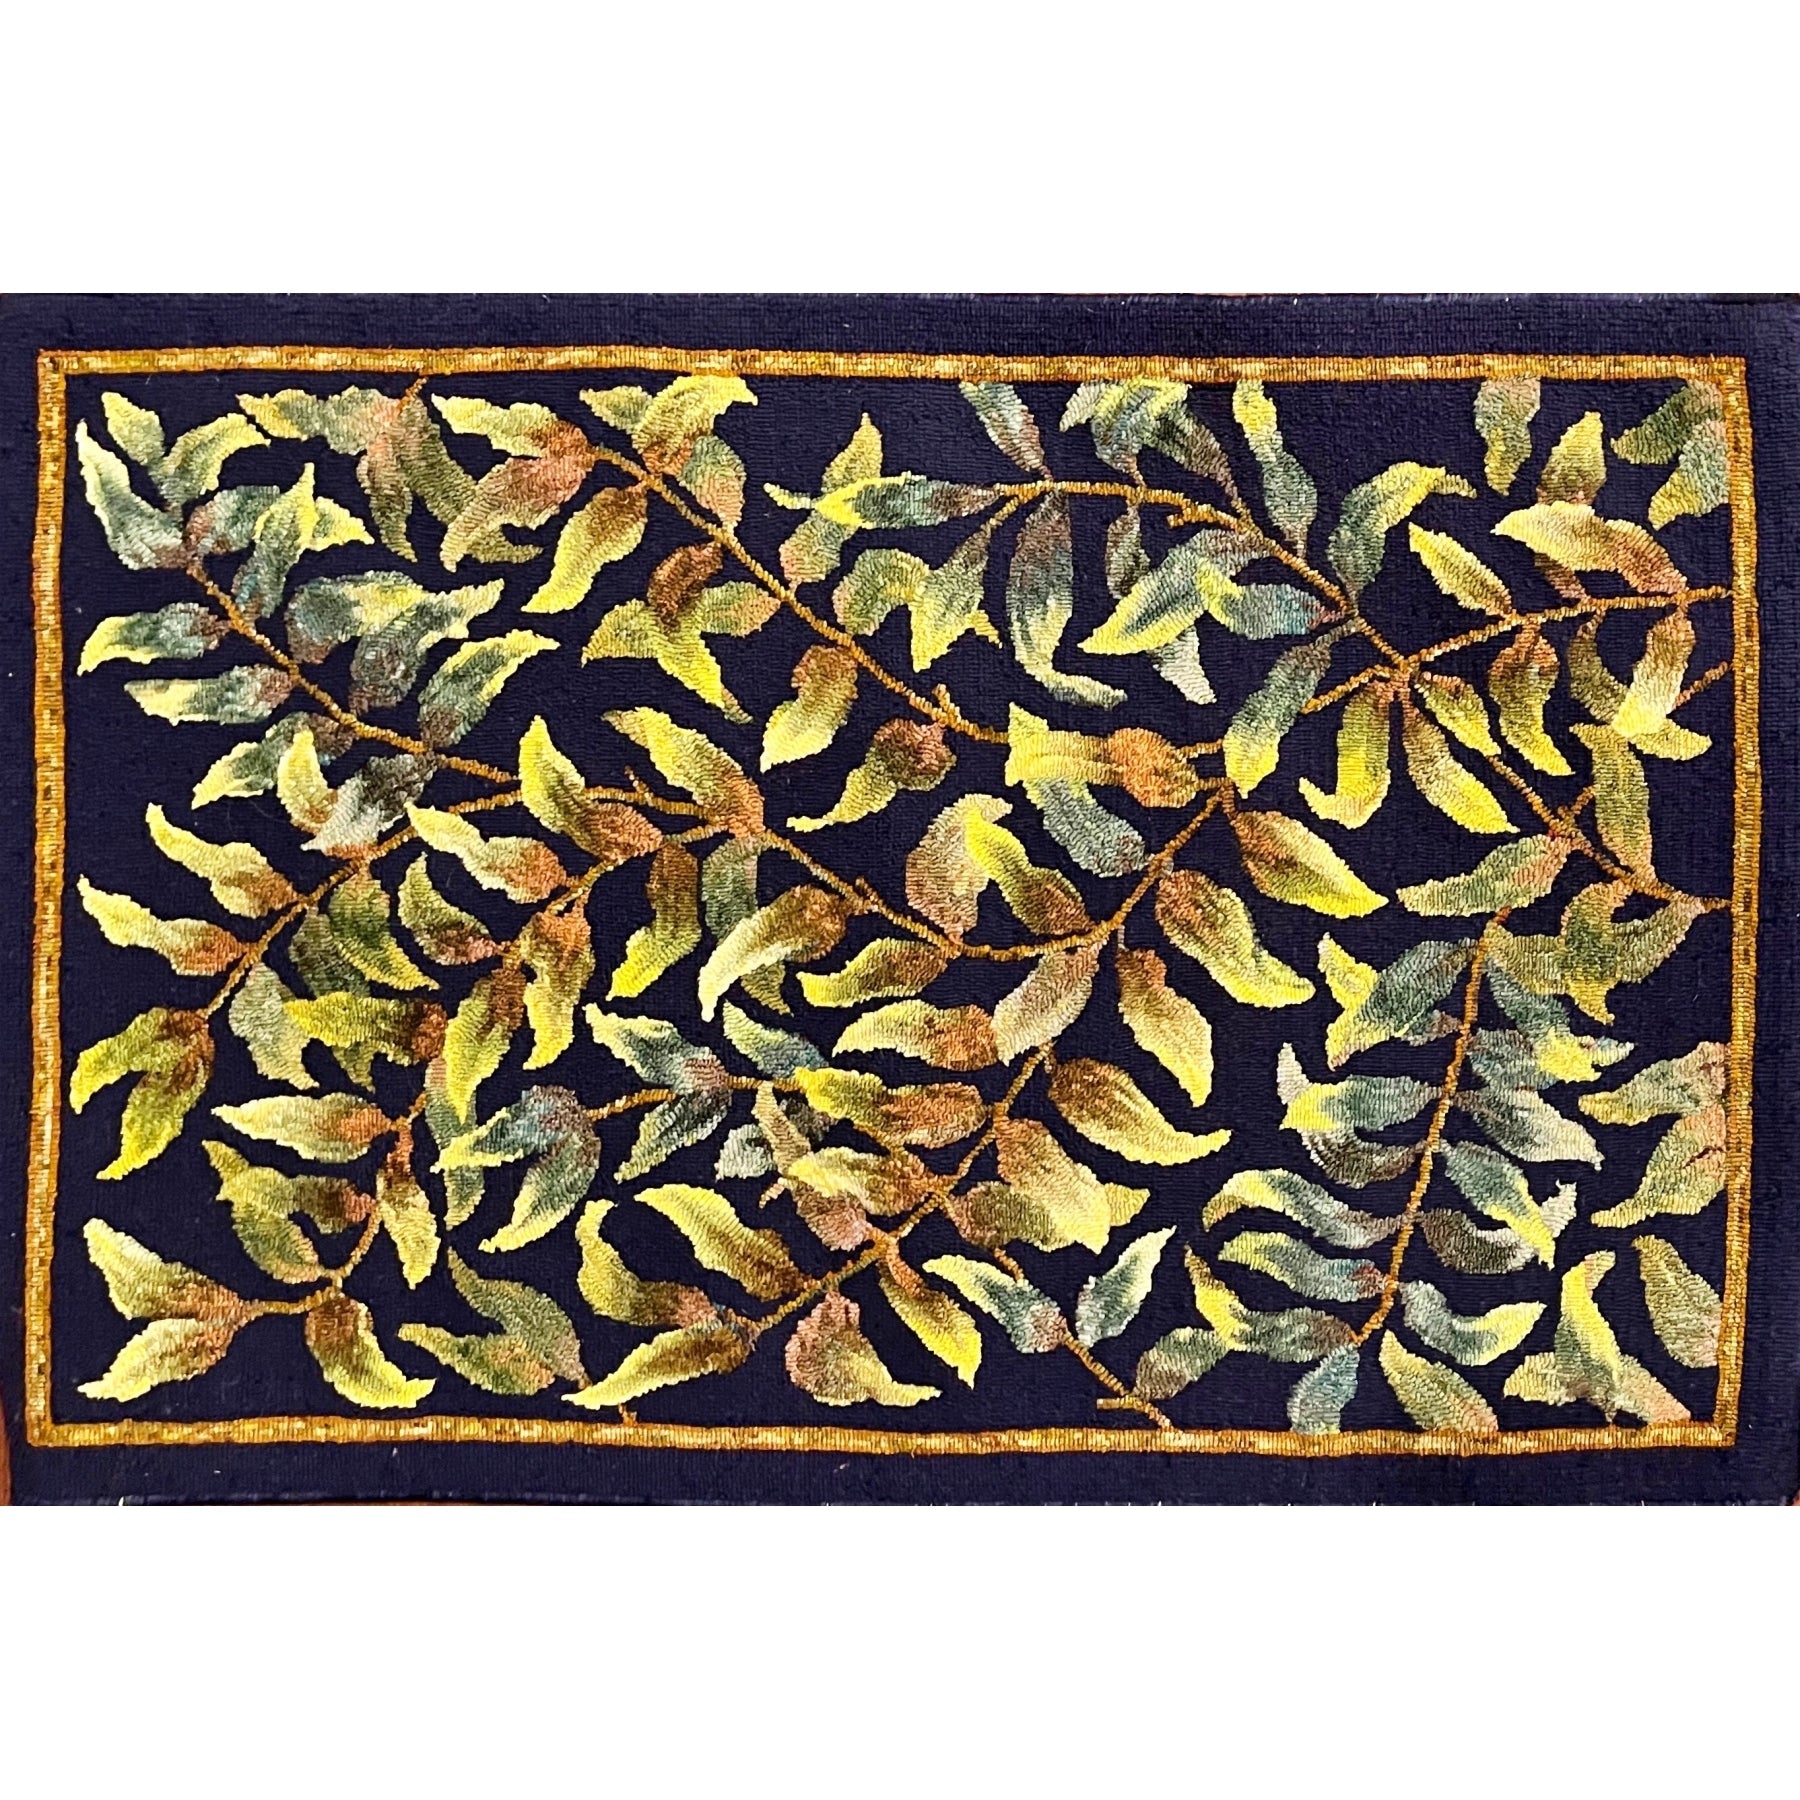 Morris Willows, rug hooked by Jane McGown Flynn